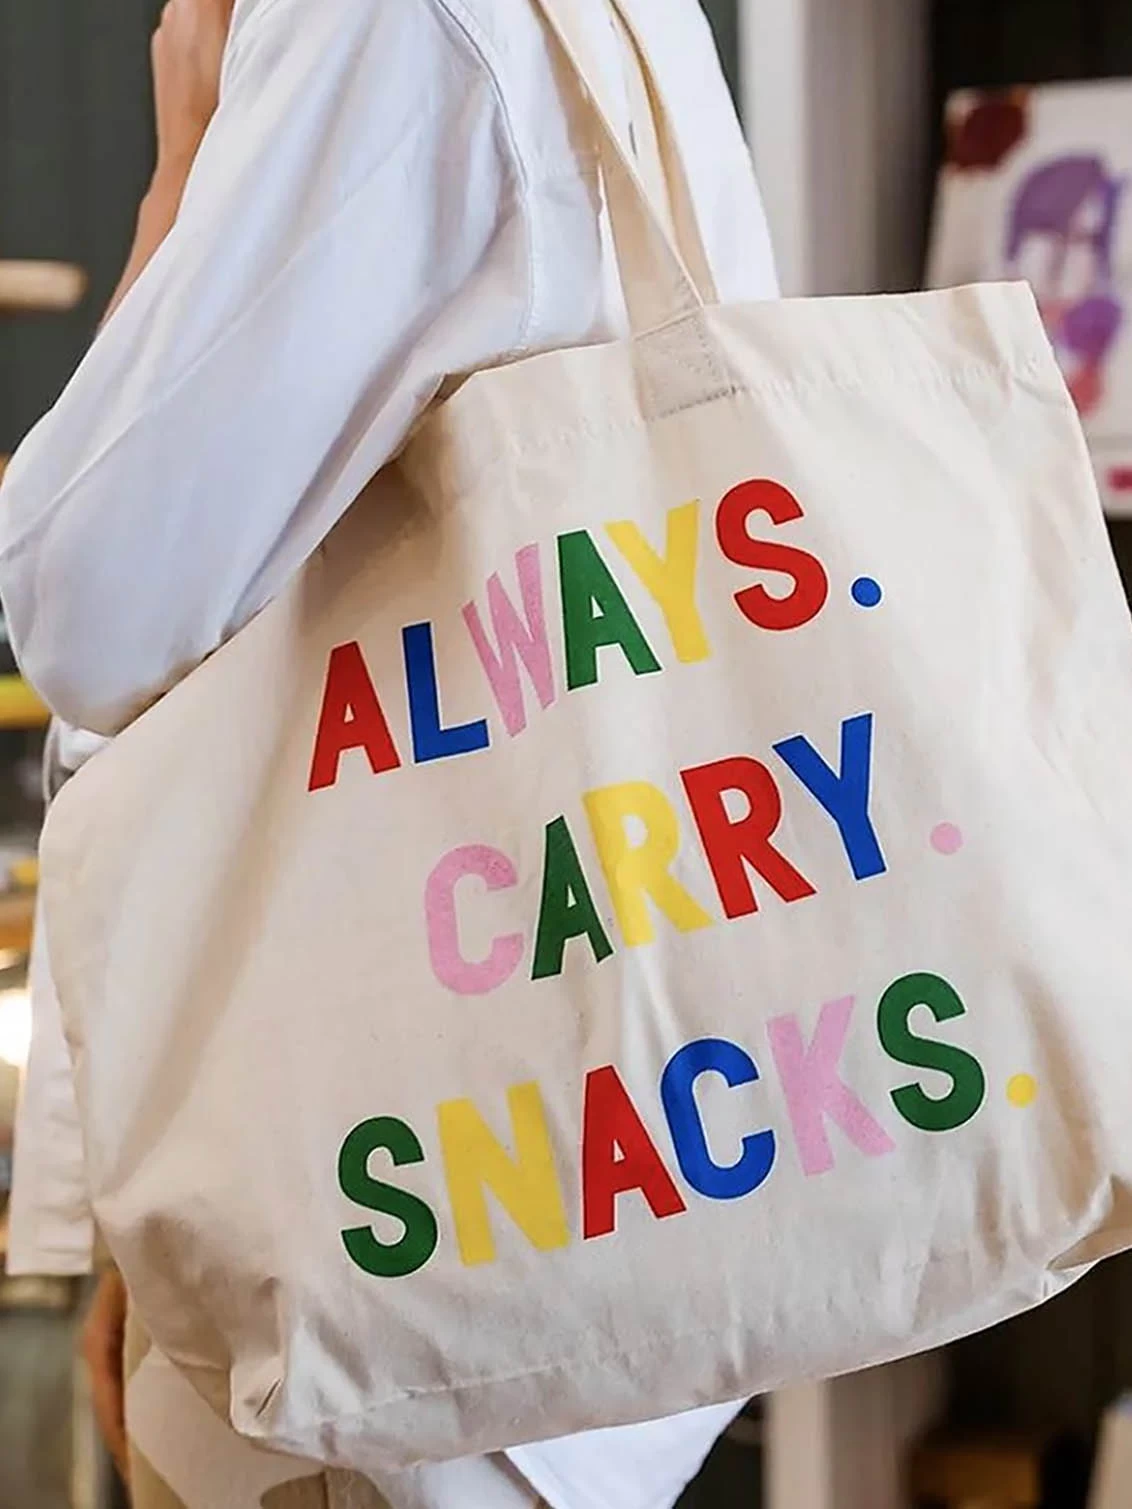 A person carrying a canvas tote bag with Always Carry Snacks slogan